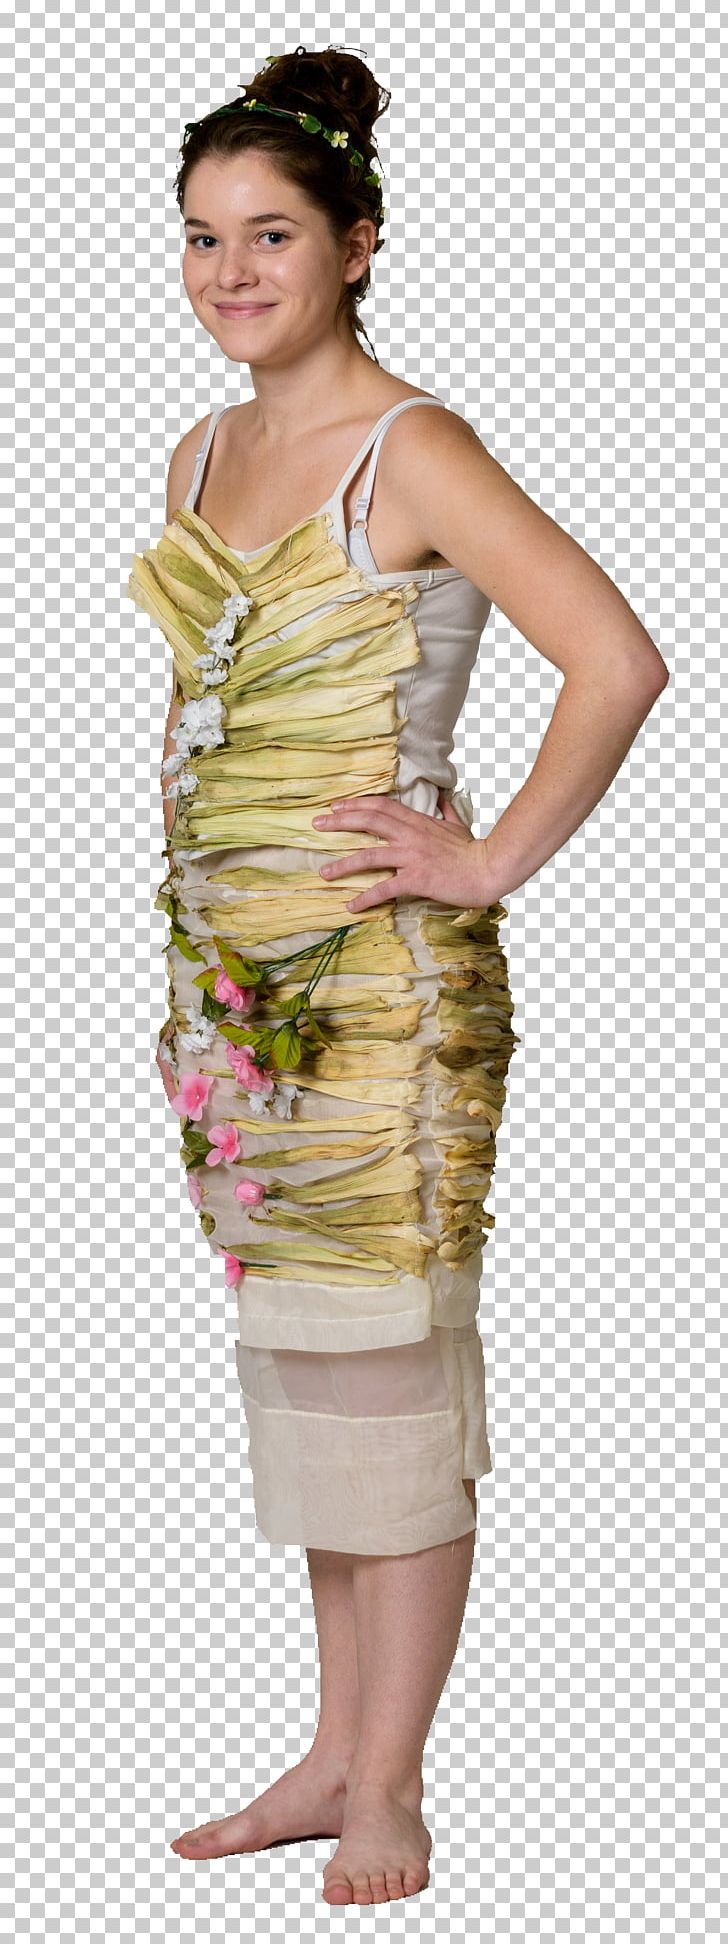 Flower Tucci Fashion Model Fashion Show PNG, Clipart, Child, Clothing, Cocktail Dress, Costume, Day Dress Free PNG Download